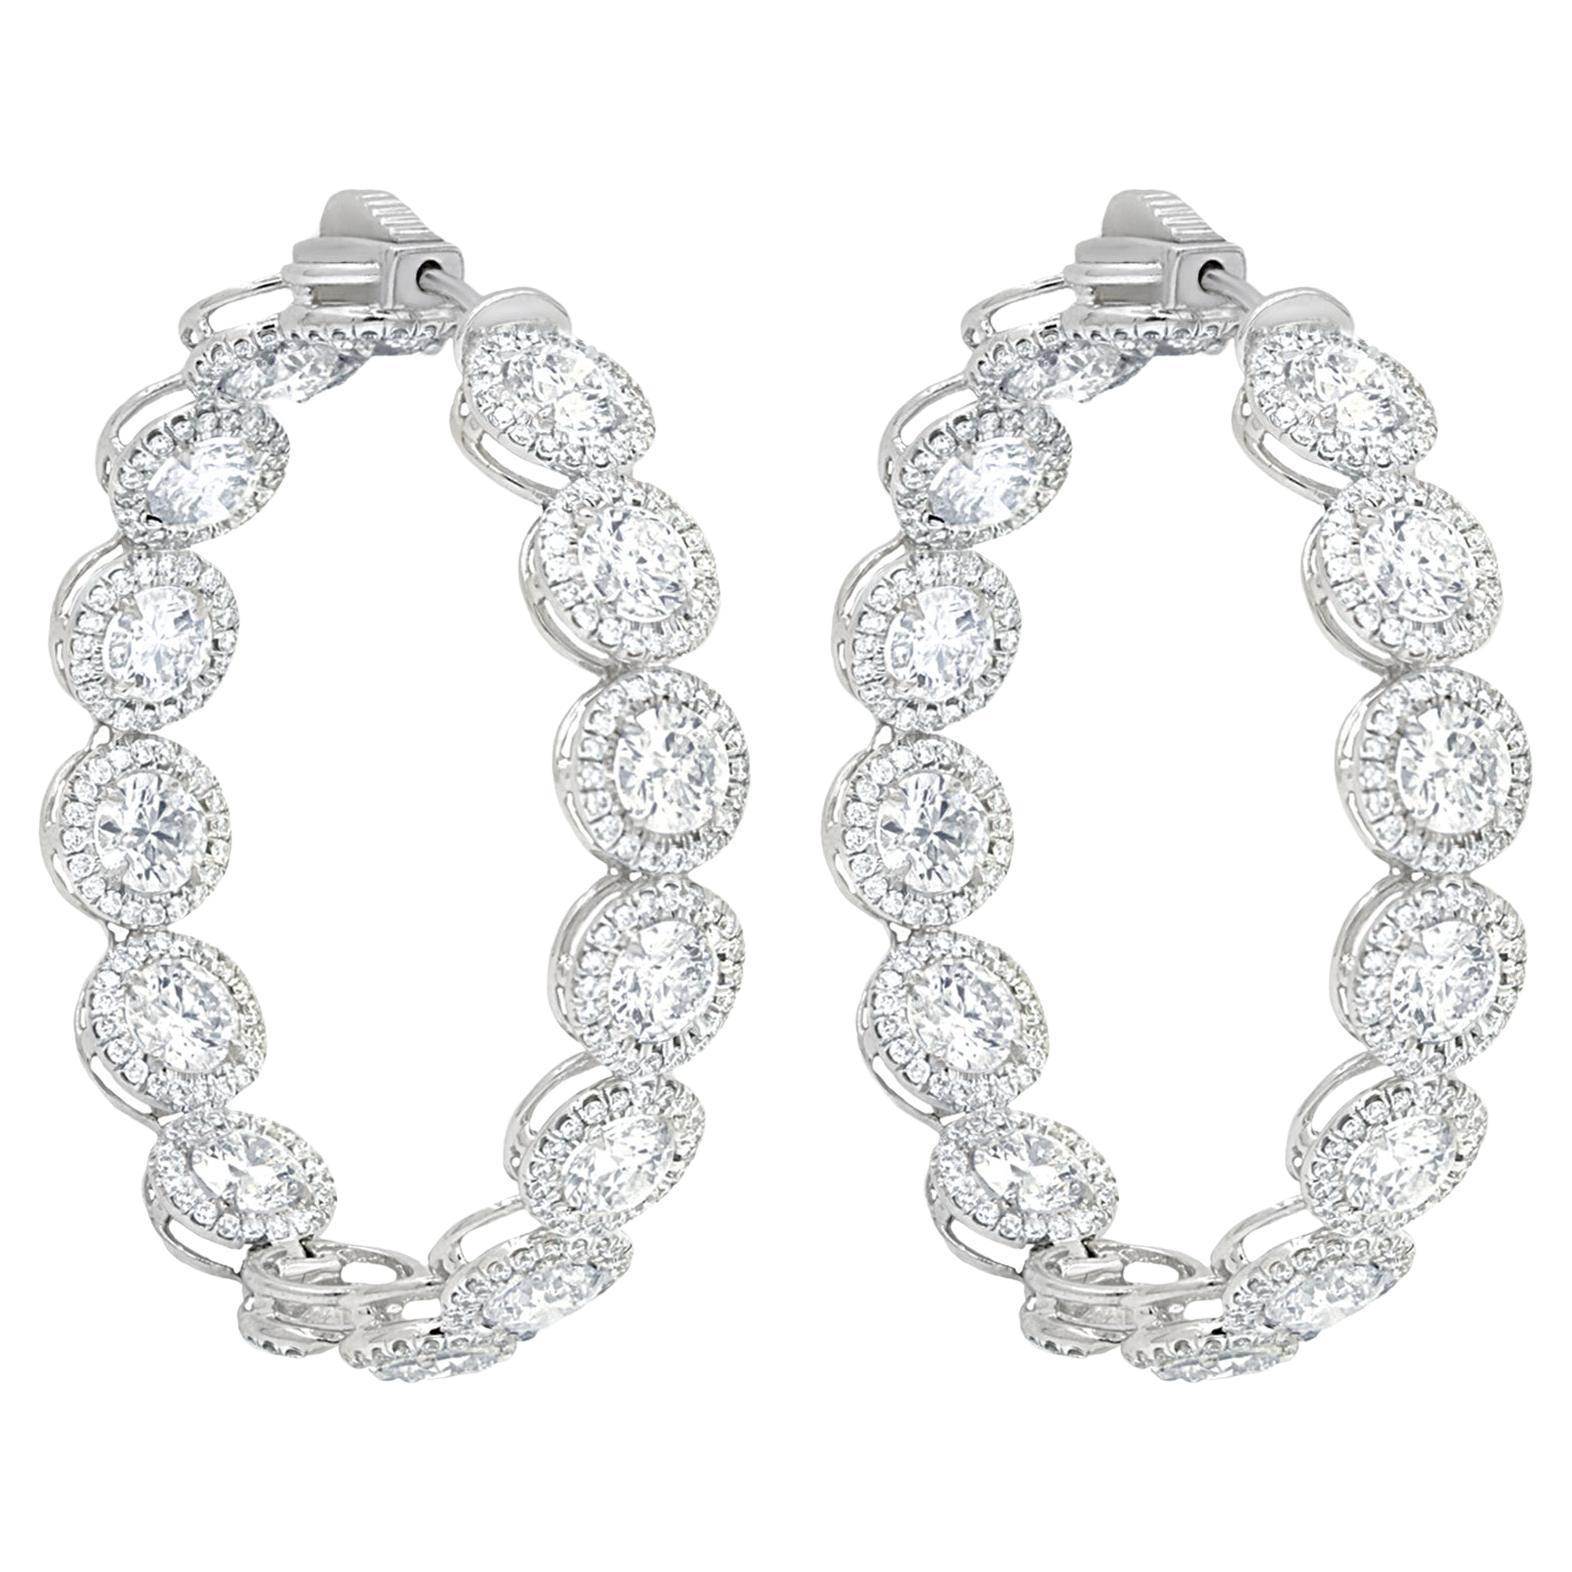 Diana M. 18 kt white gold, 1.50" inside-out hoop earrings with 12.20cts halo  For Sale